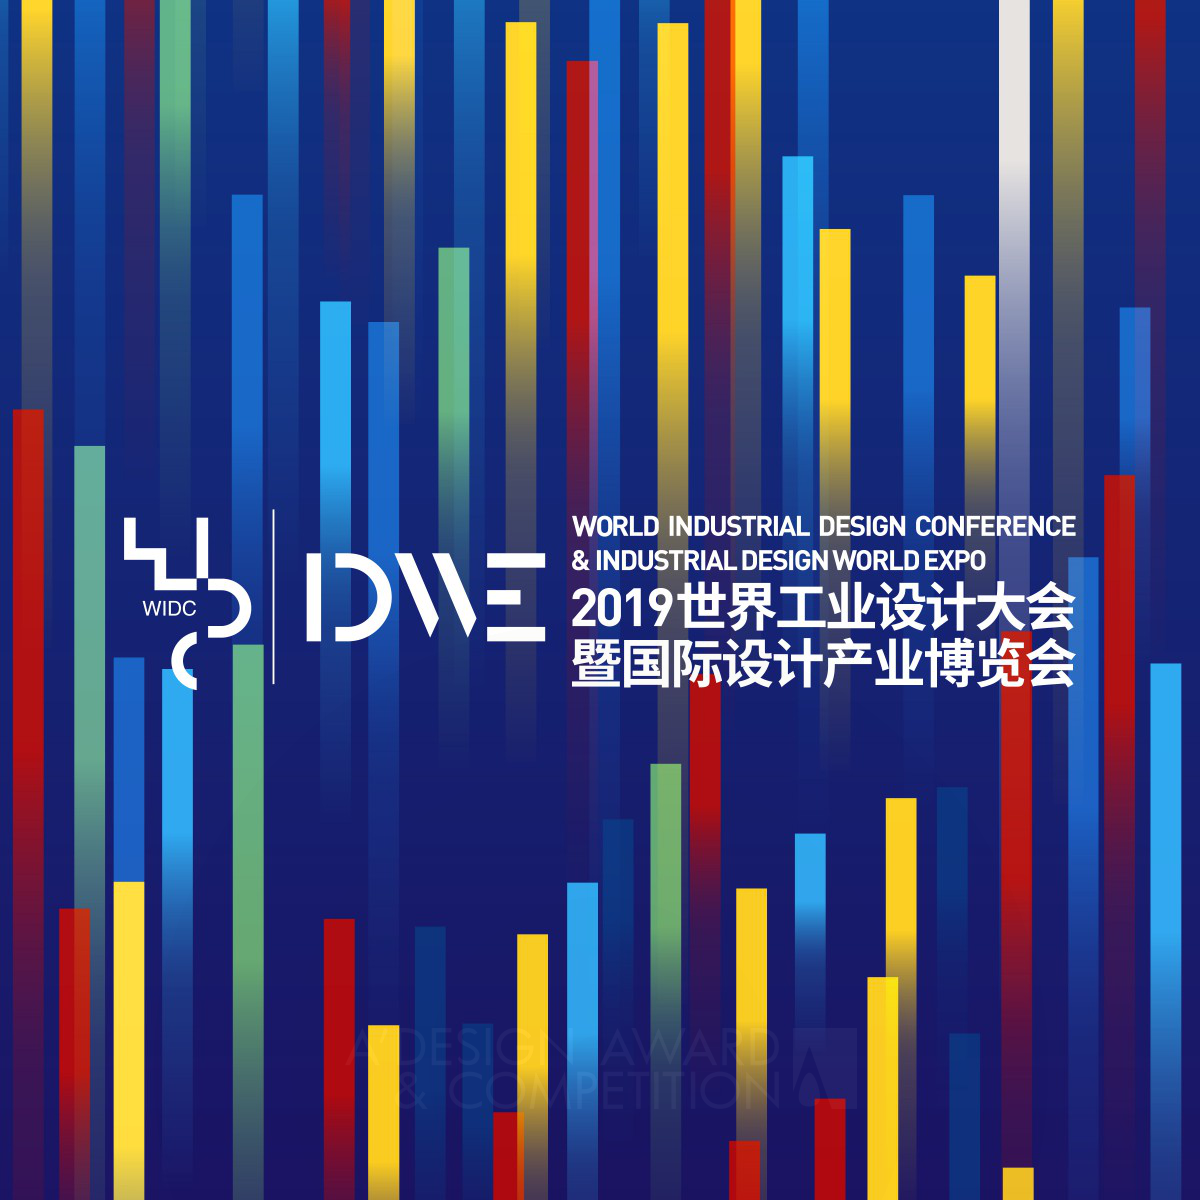 2019 World Industrial Design Conference Visual Identity System by Shandong Industrial Design Institute